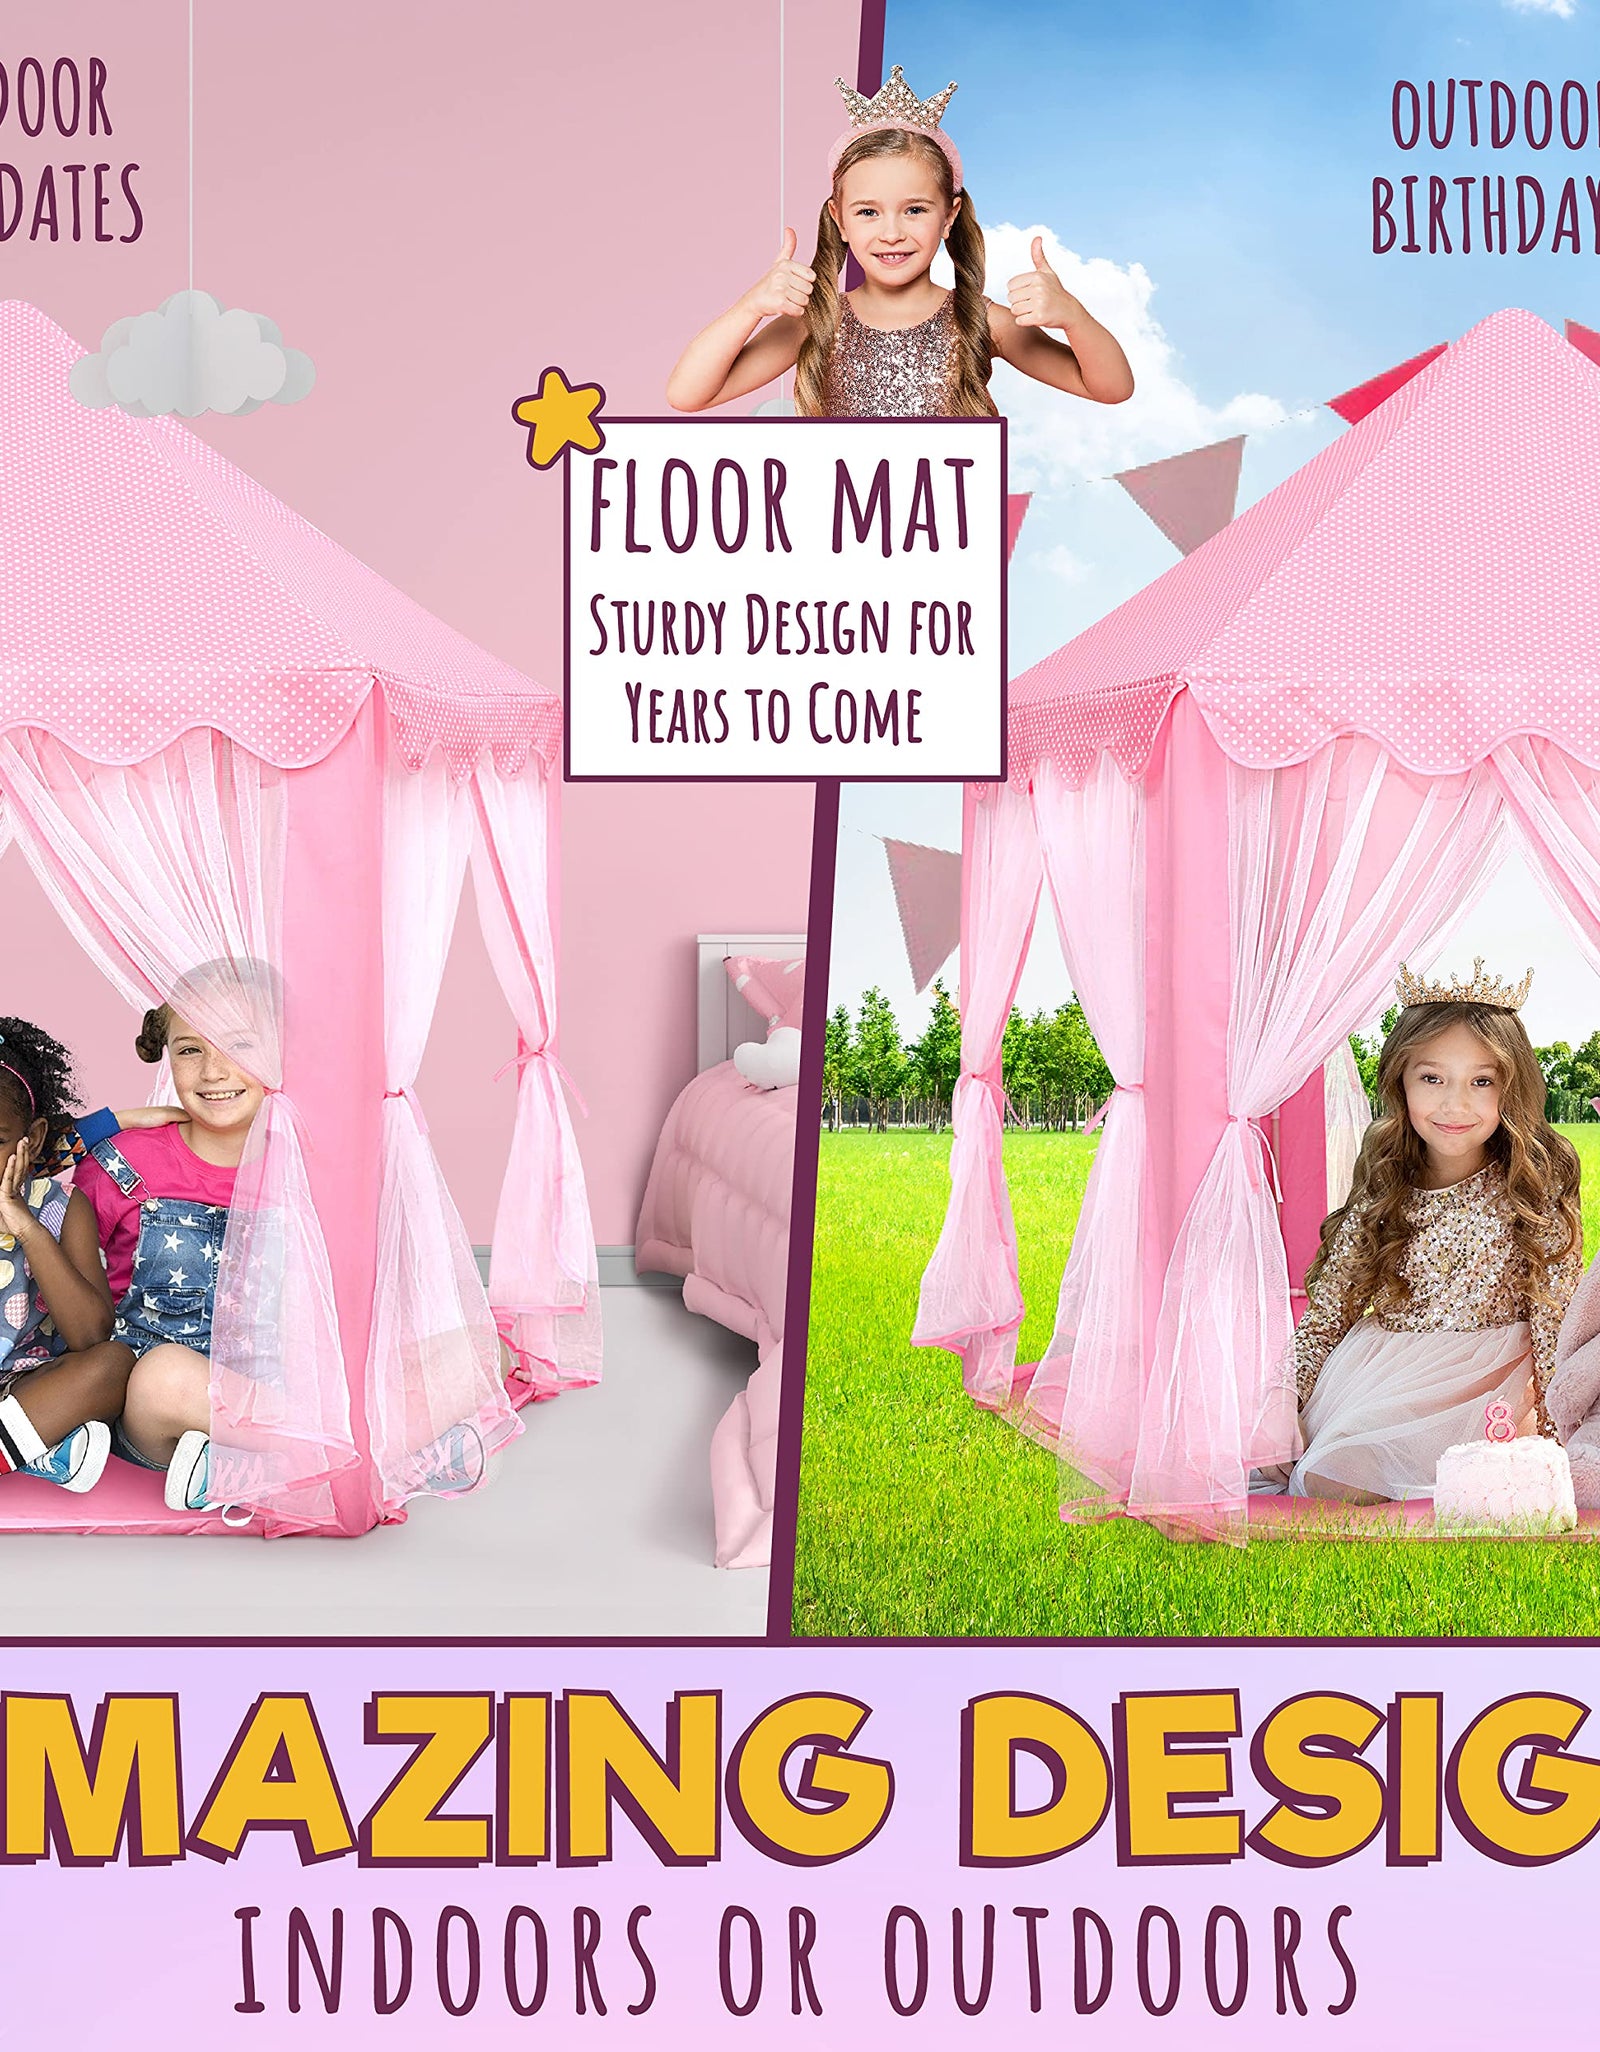 Orian Princess Castle Playhouse Tent for Girls with LED Star Lights – Indoor & Outdoor Large Kids Play Tent for Imaginative Games – ASTM Certified, Princess Tent, 230 Polyester Taffeta. Pink 55"x53".